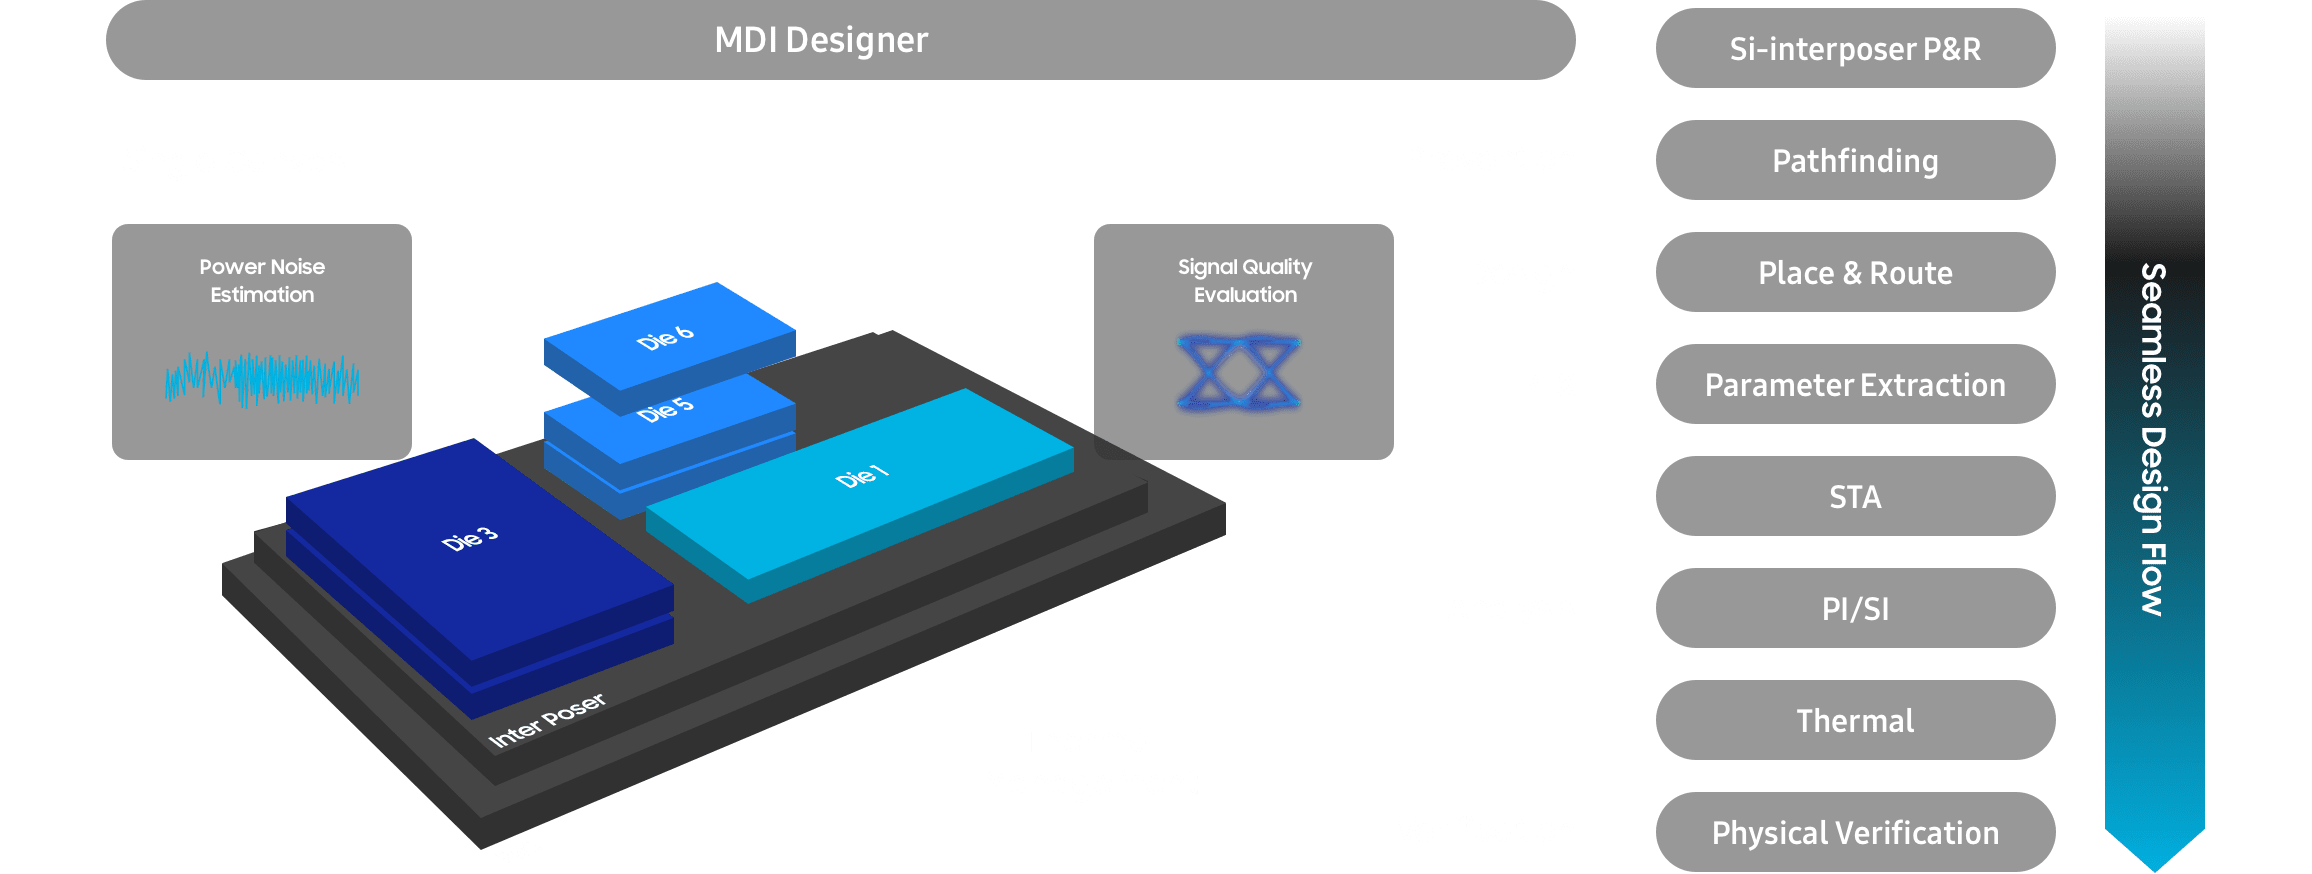 the image about MDI Designer